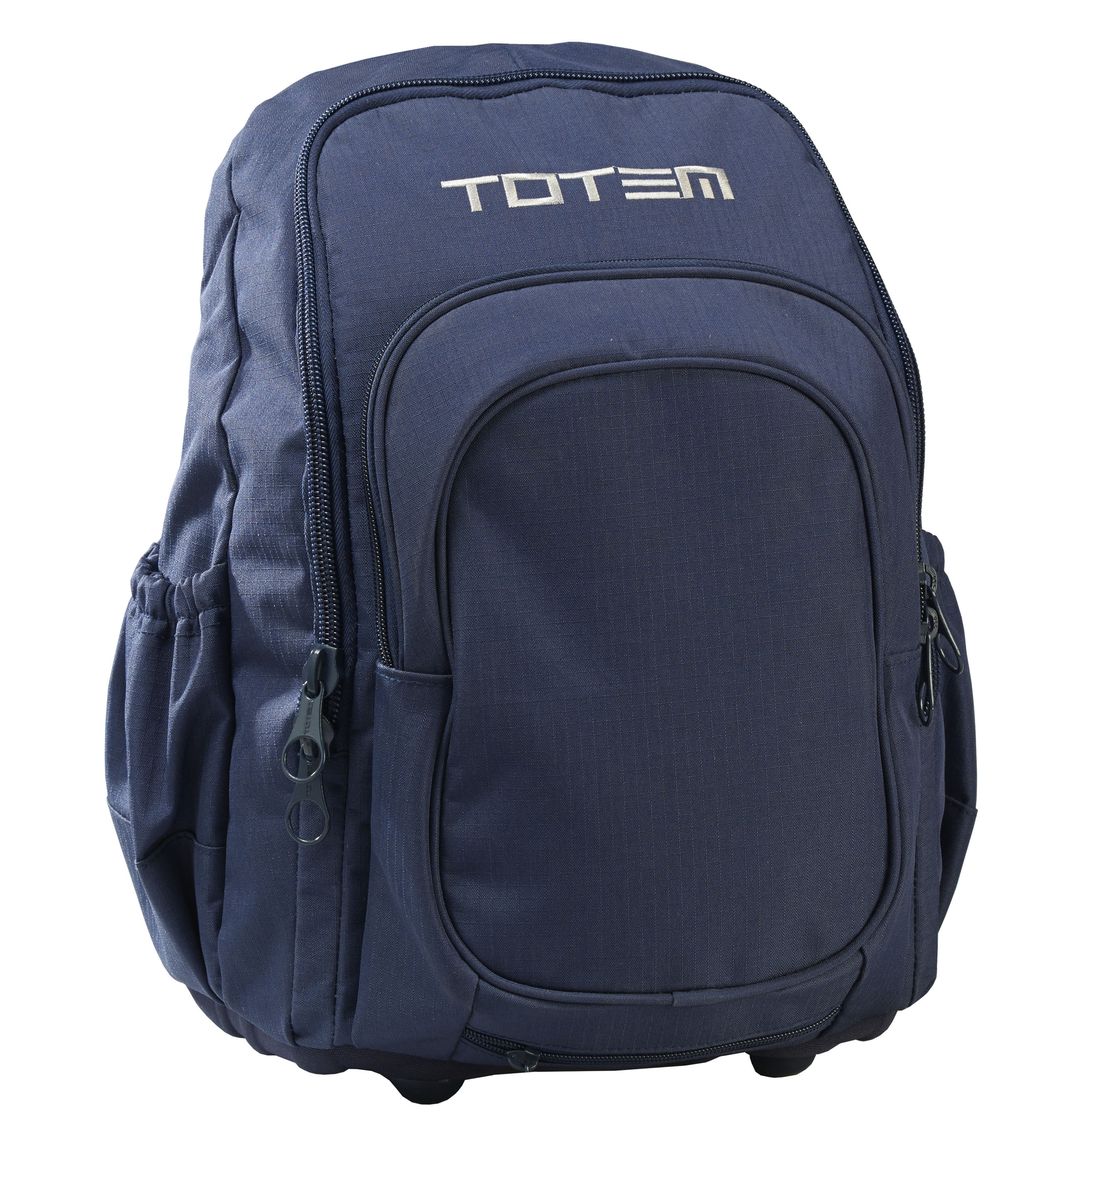 Totem Craze Orthopaedic School Bag - Navy (size: M) | Buy Online in South Africa | 0